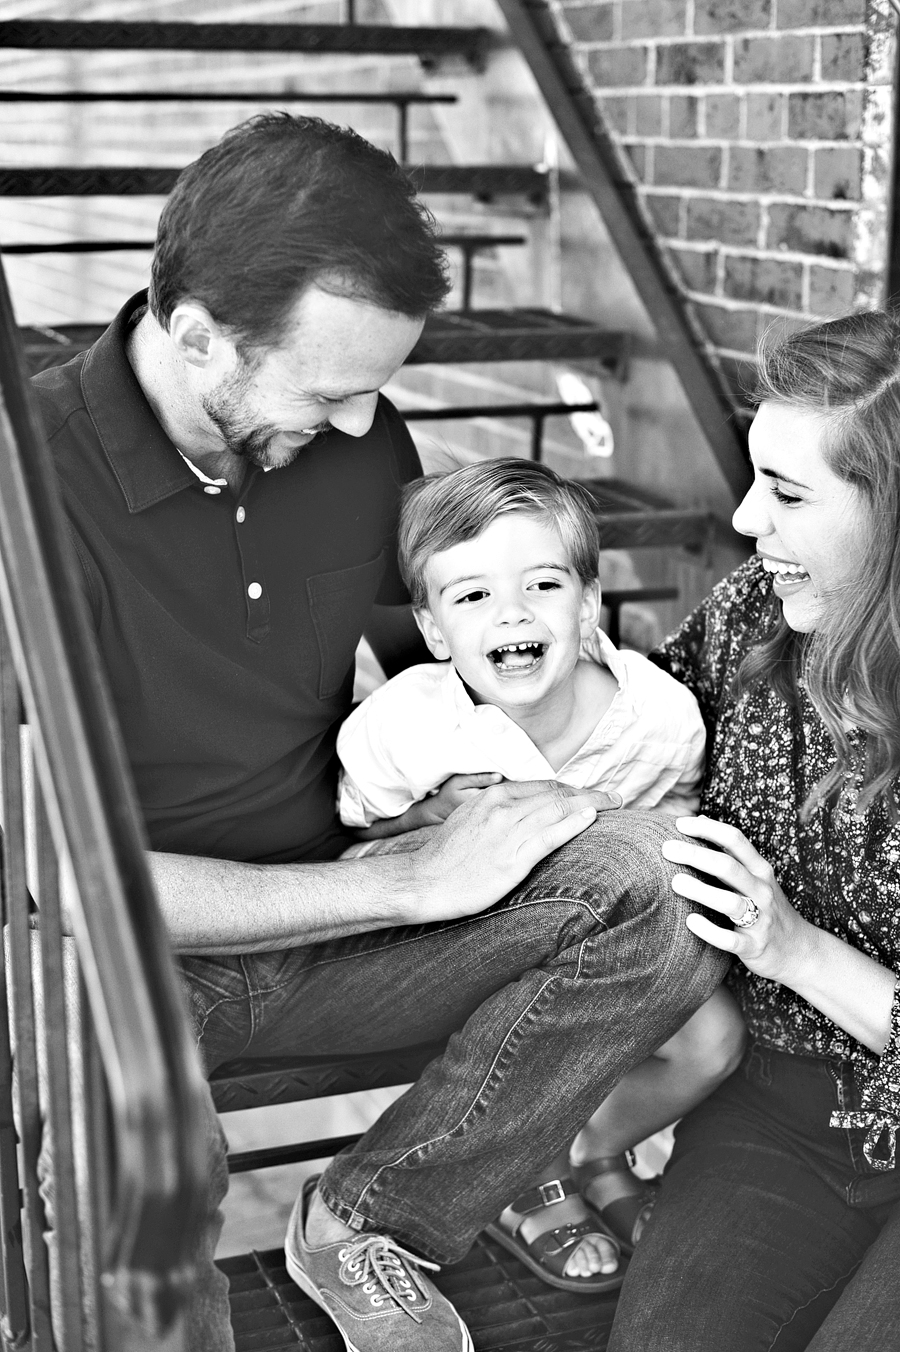 vacation family photos in portland, maine